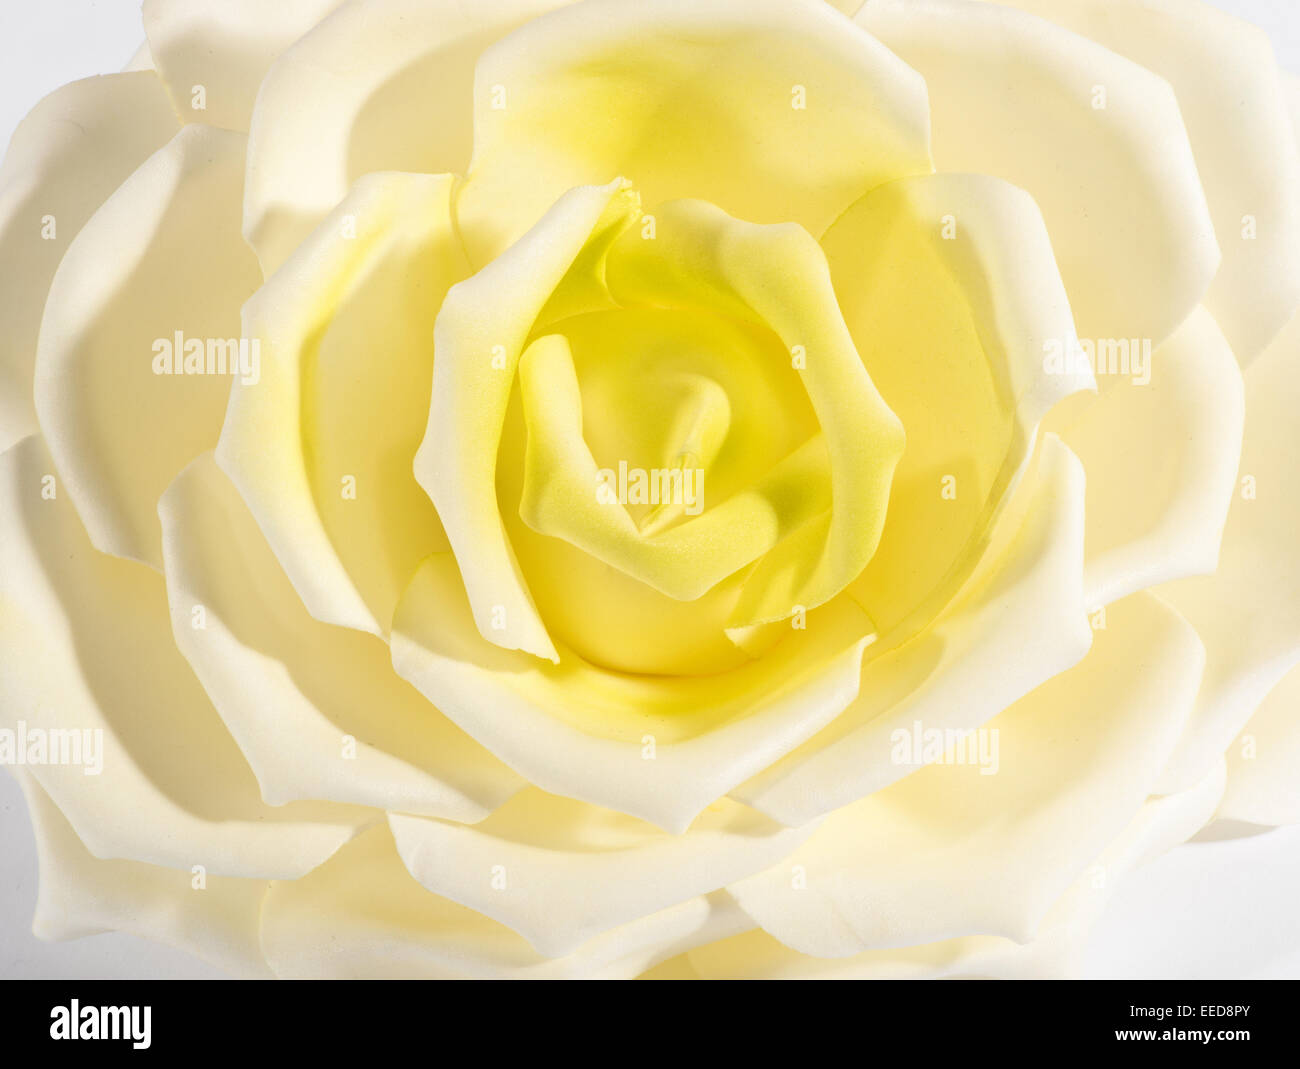 Close up detail of a white and yellow rose Stock Photo